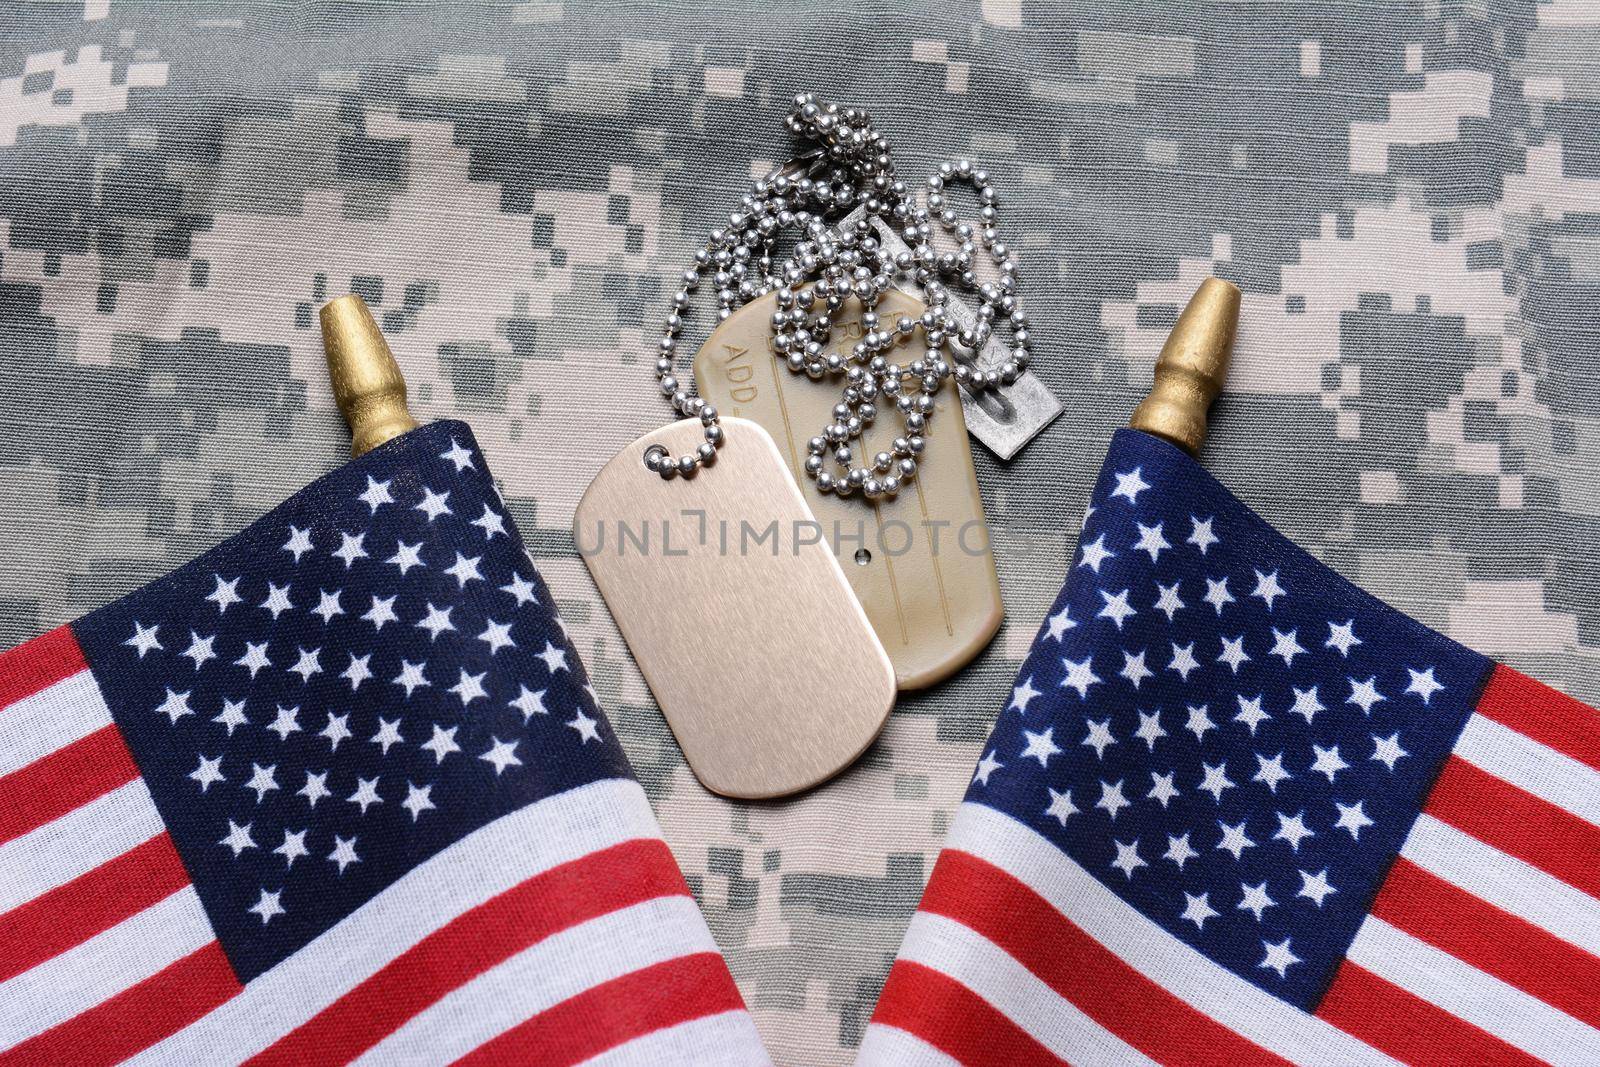 Closeup of two crossed American Flags on camouflage material with dog tags in the middle. The ID tags are blank. Horizontal format filling the frame.